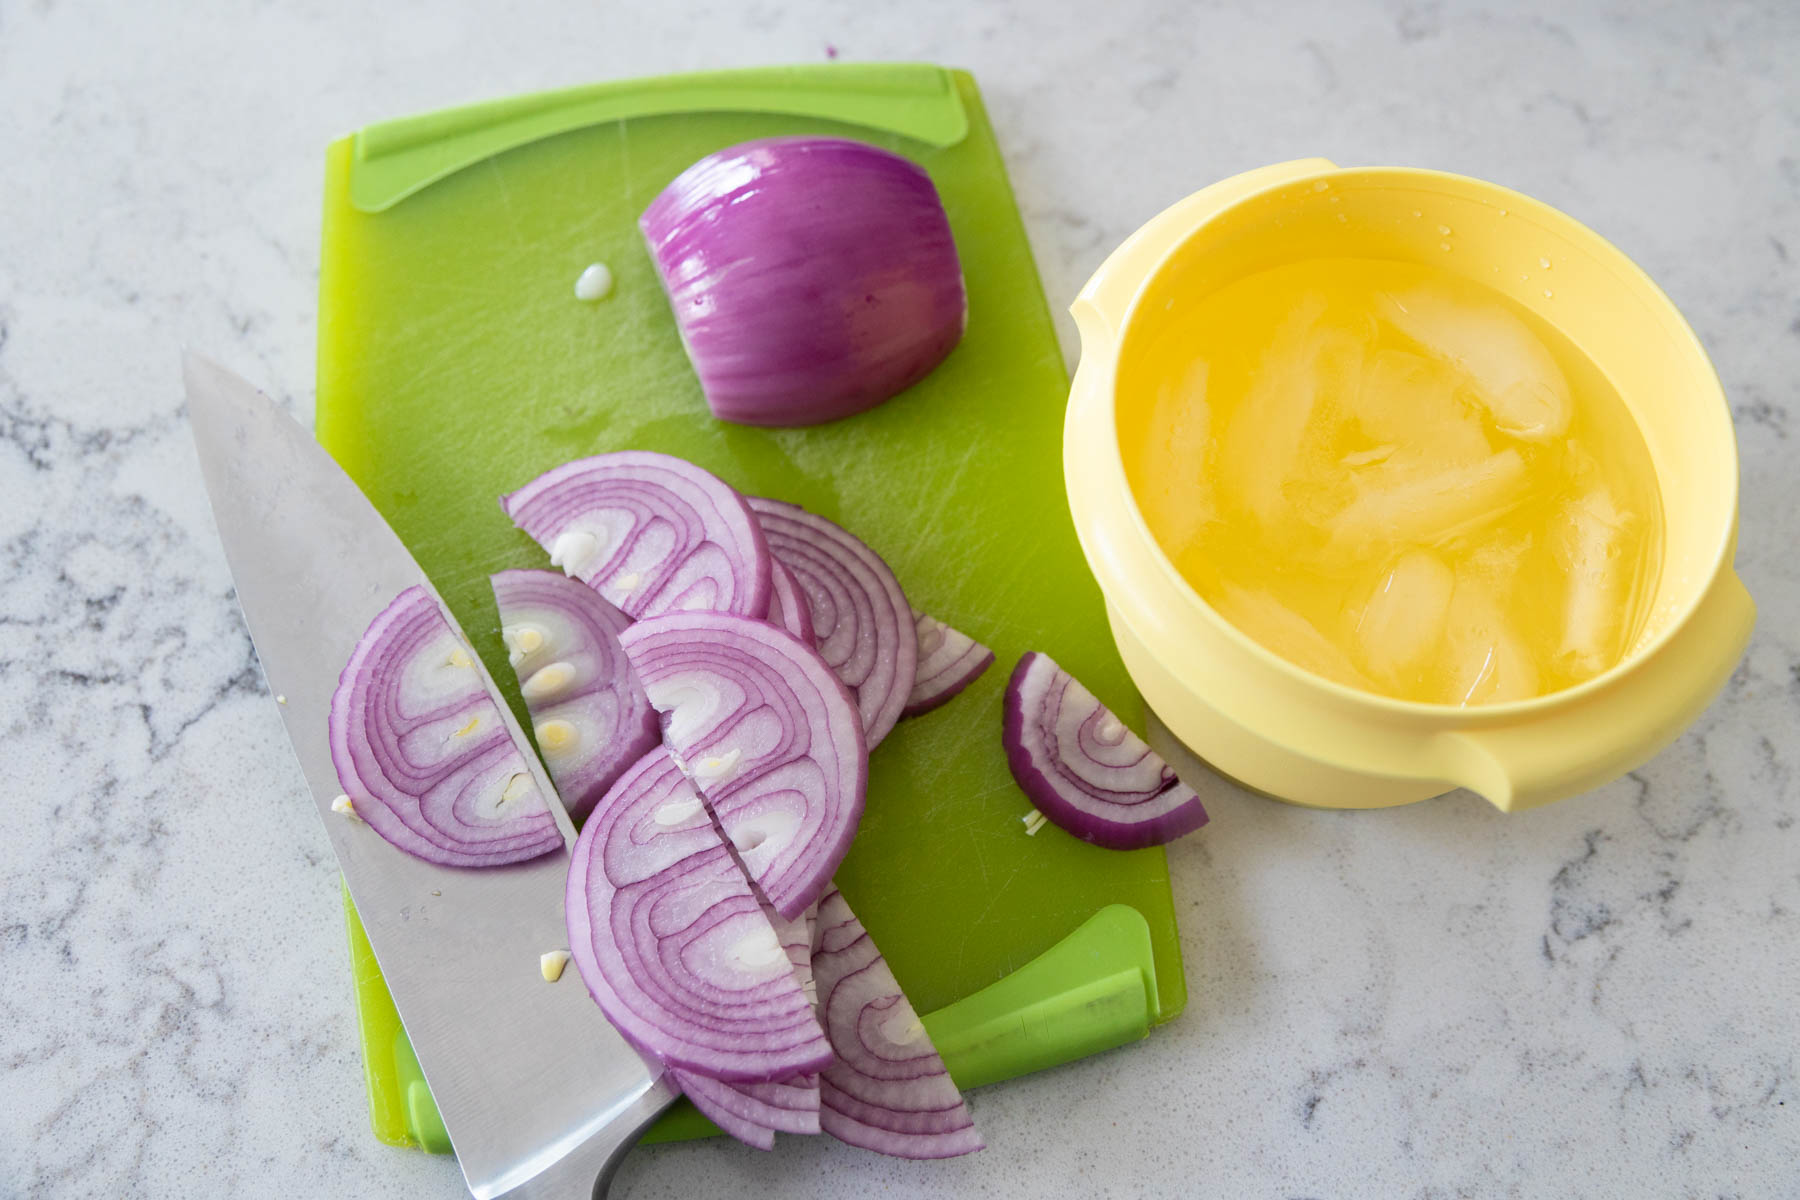 The red onion has been sliced on a cutting board and a yellow bowl of ice water is ready for it to do a quick soak.